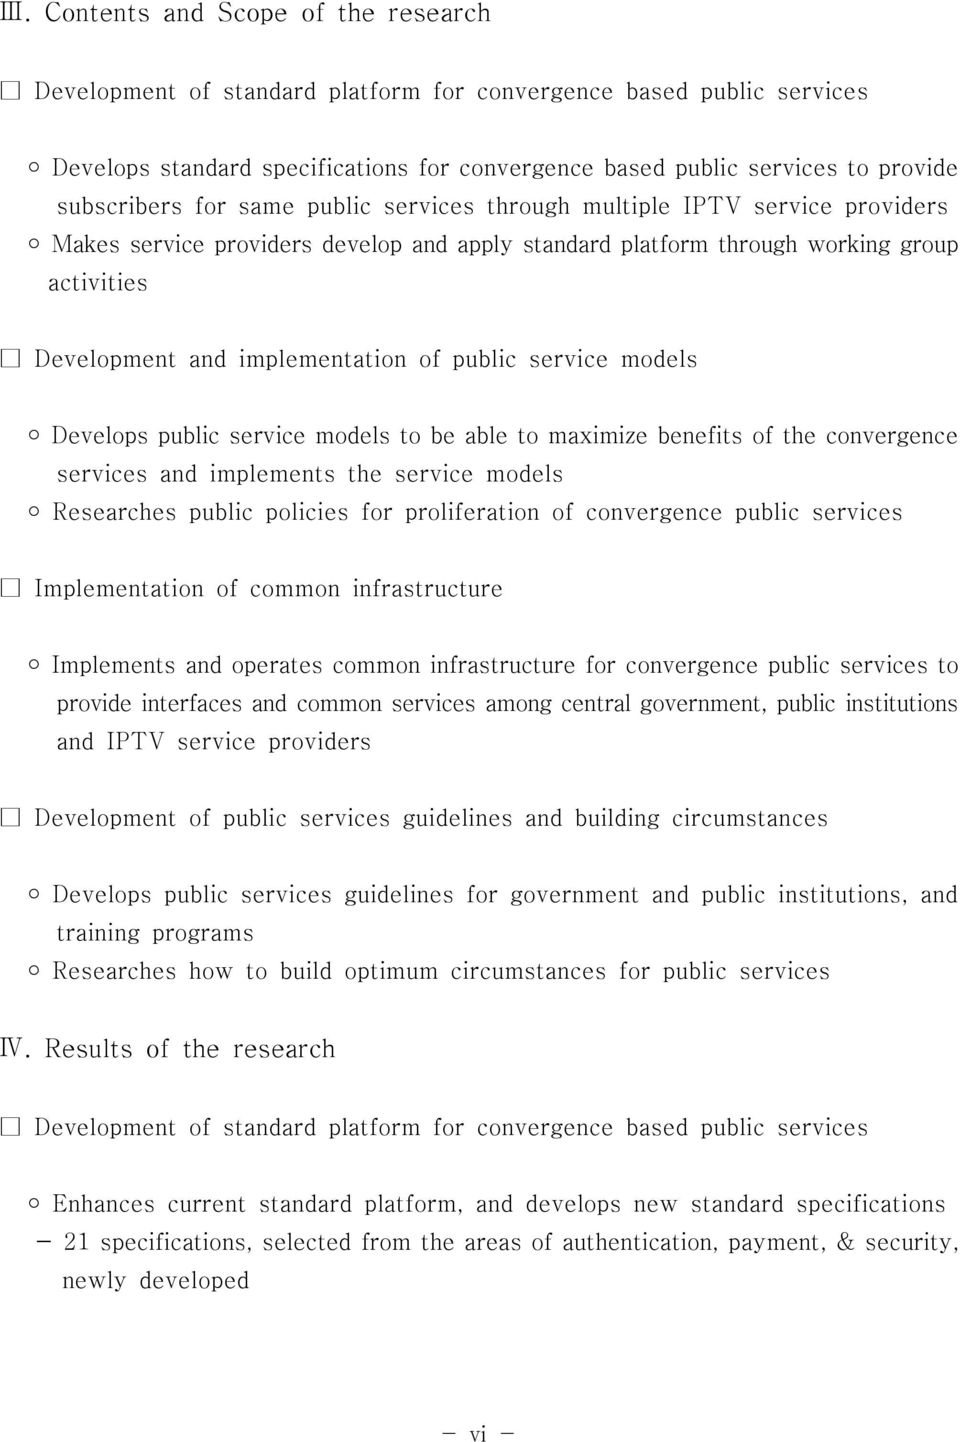 implementation of public service models Develops public service models to be able to maximize benefits of the convergence services and implements the service models Researches public policies for